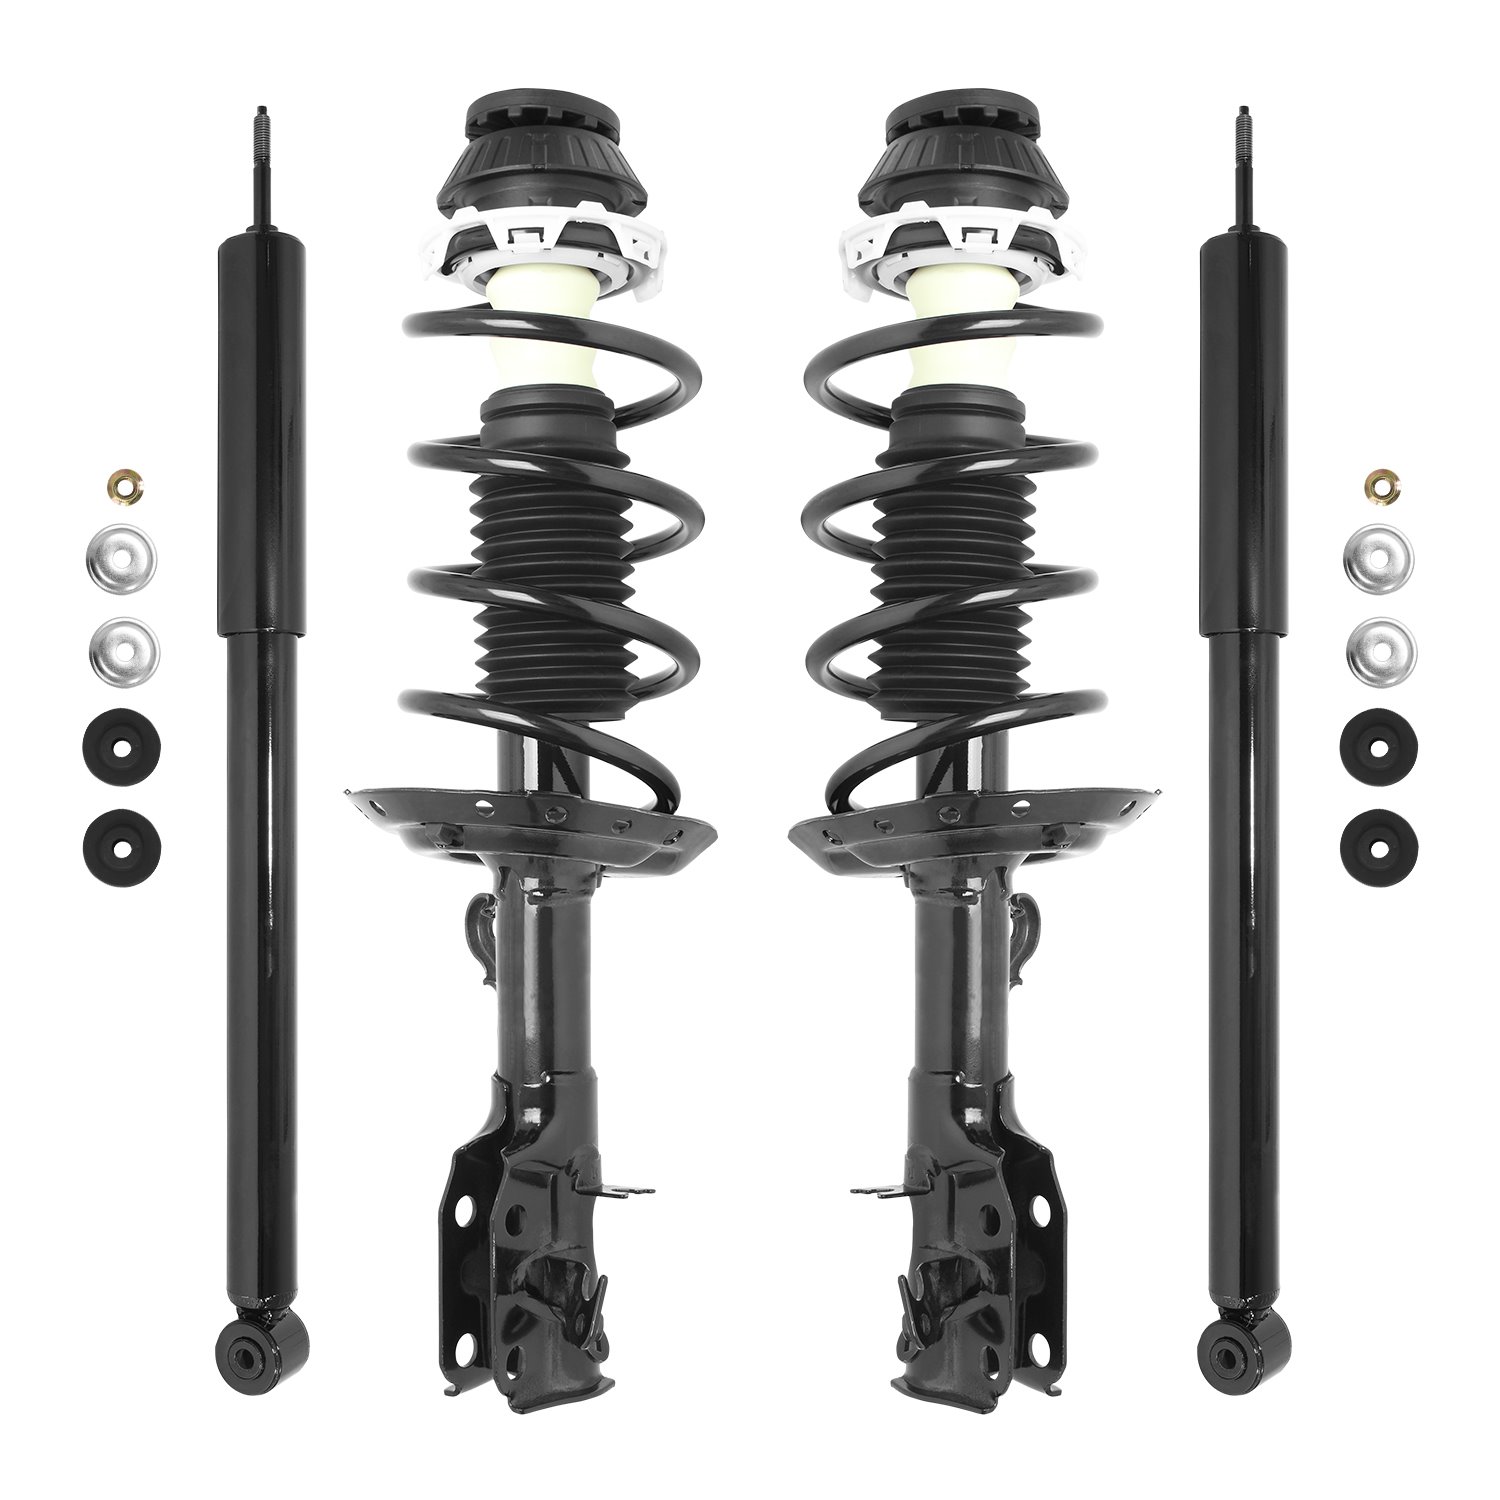 4-11311-253300-001 Front & Rear Suspension Strut & Coil Spring Assembly Fits Select Honda Fit